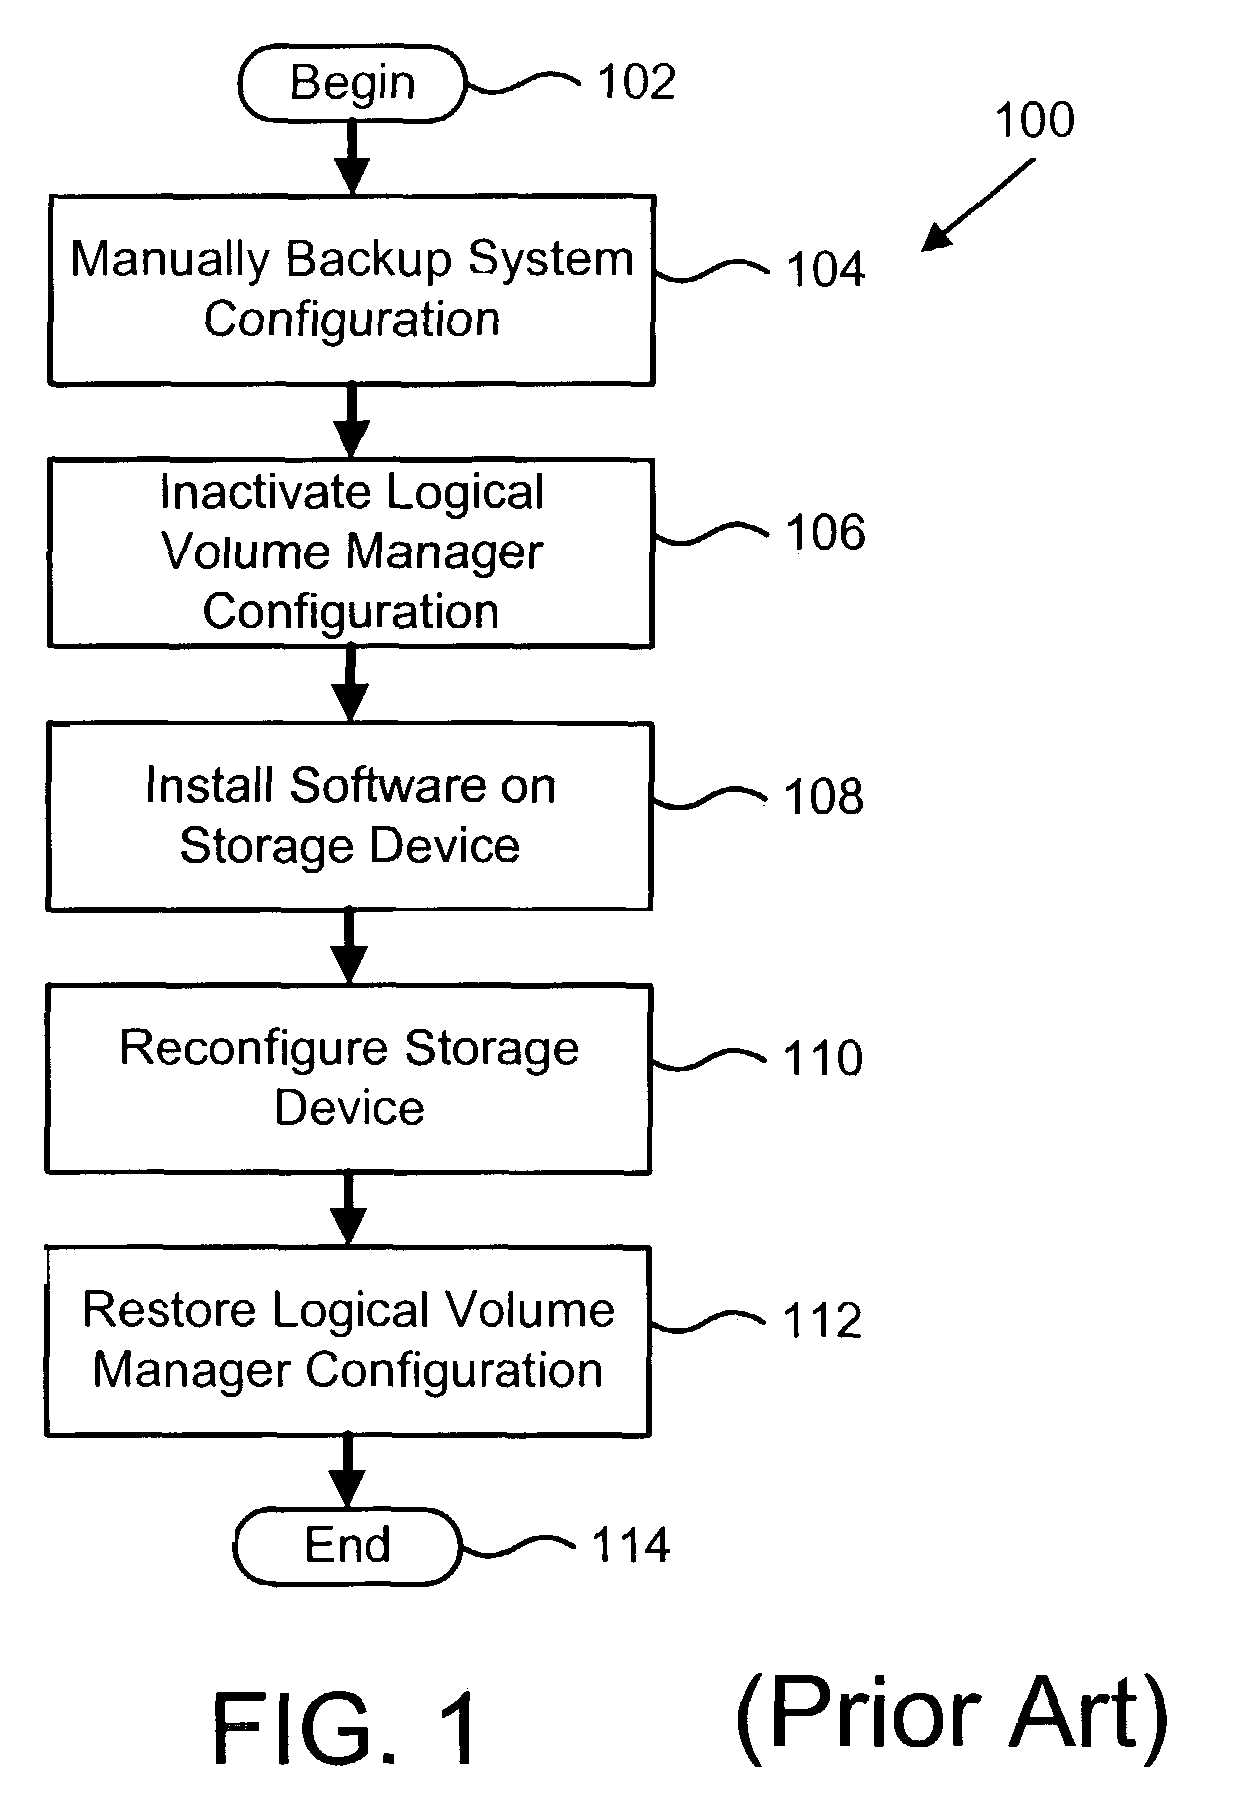 Automatic backup and restore for configuration of a logical volume manager during software installation